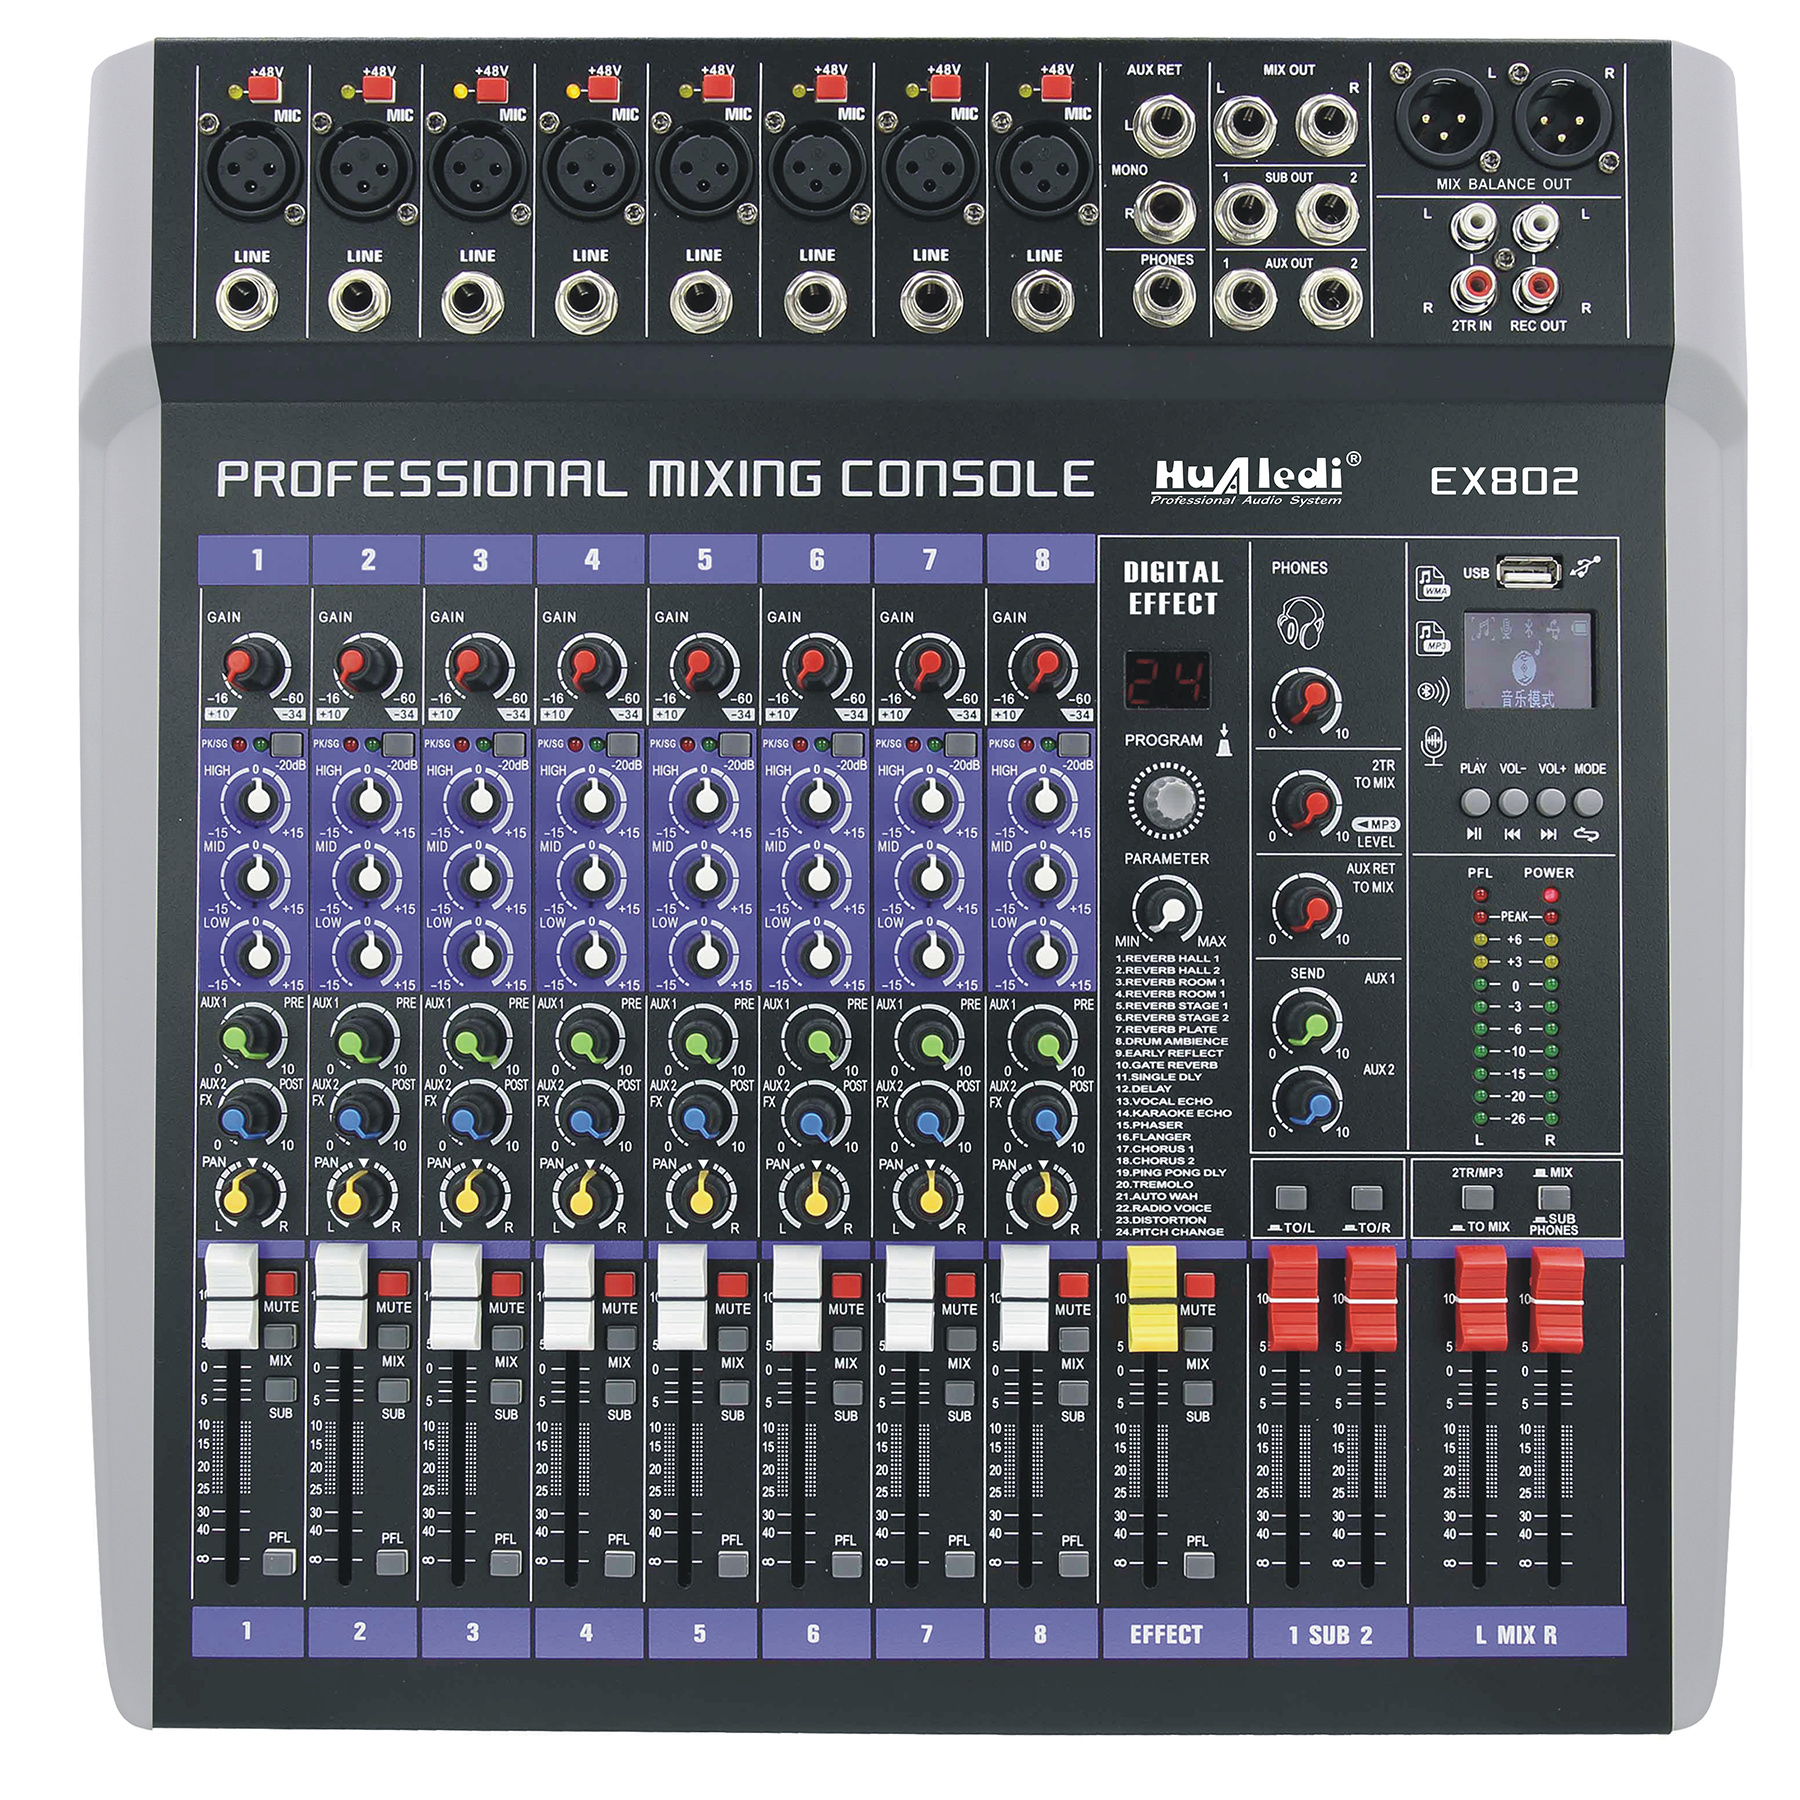 8 channels mixing console MP3